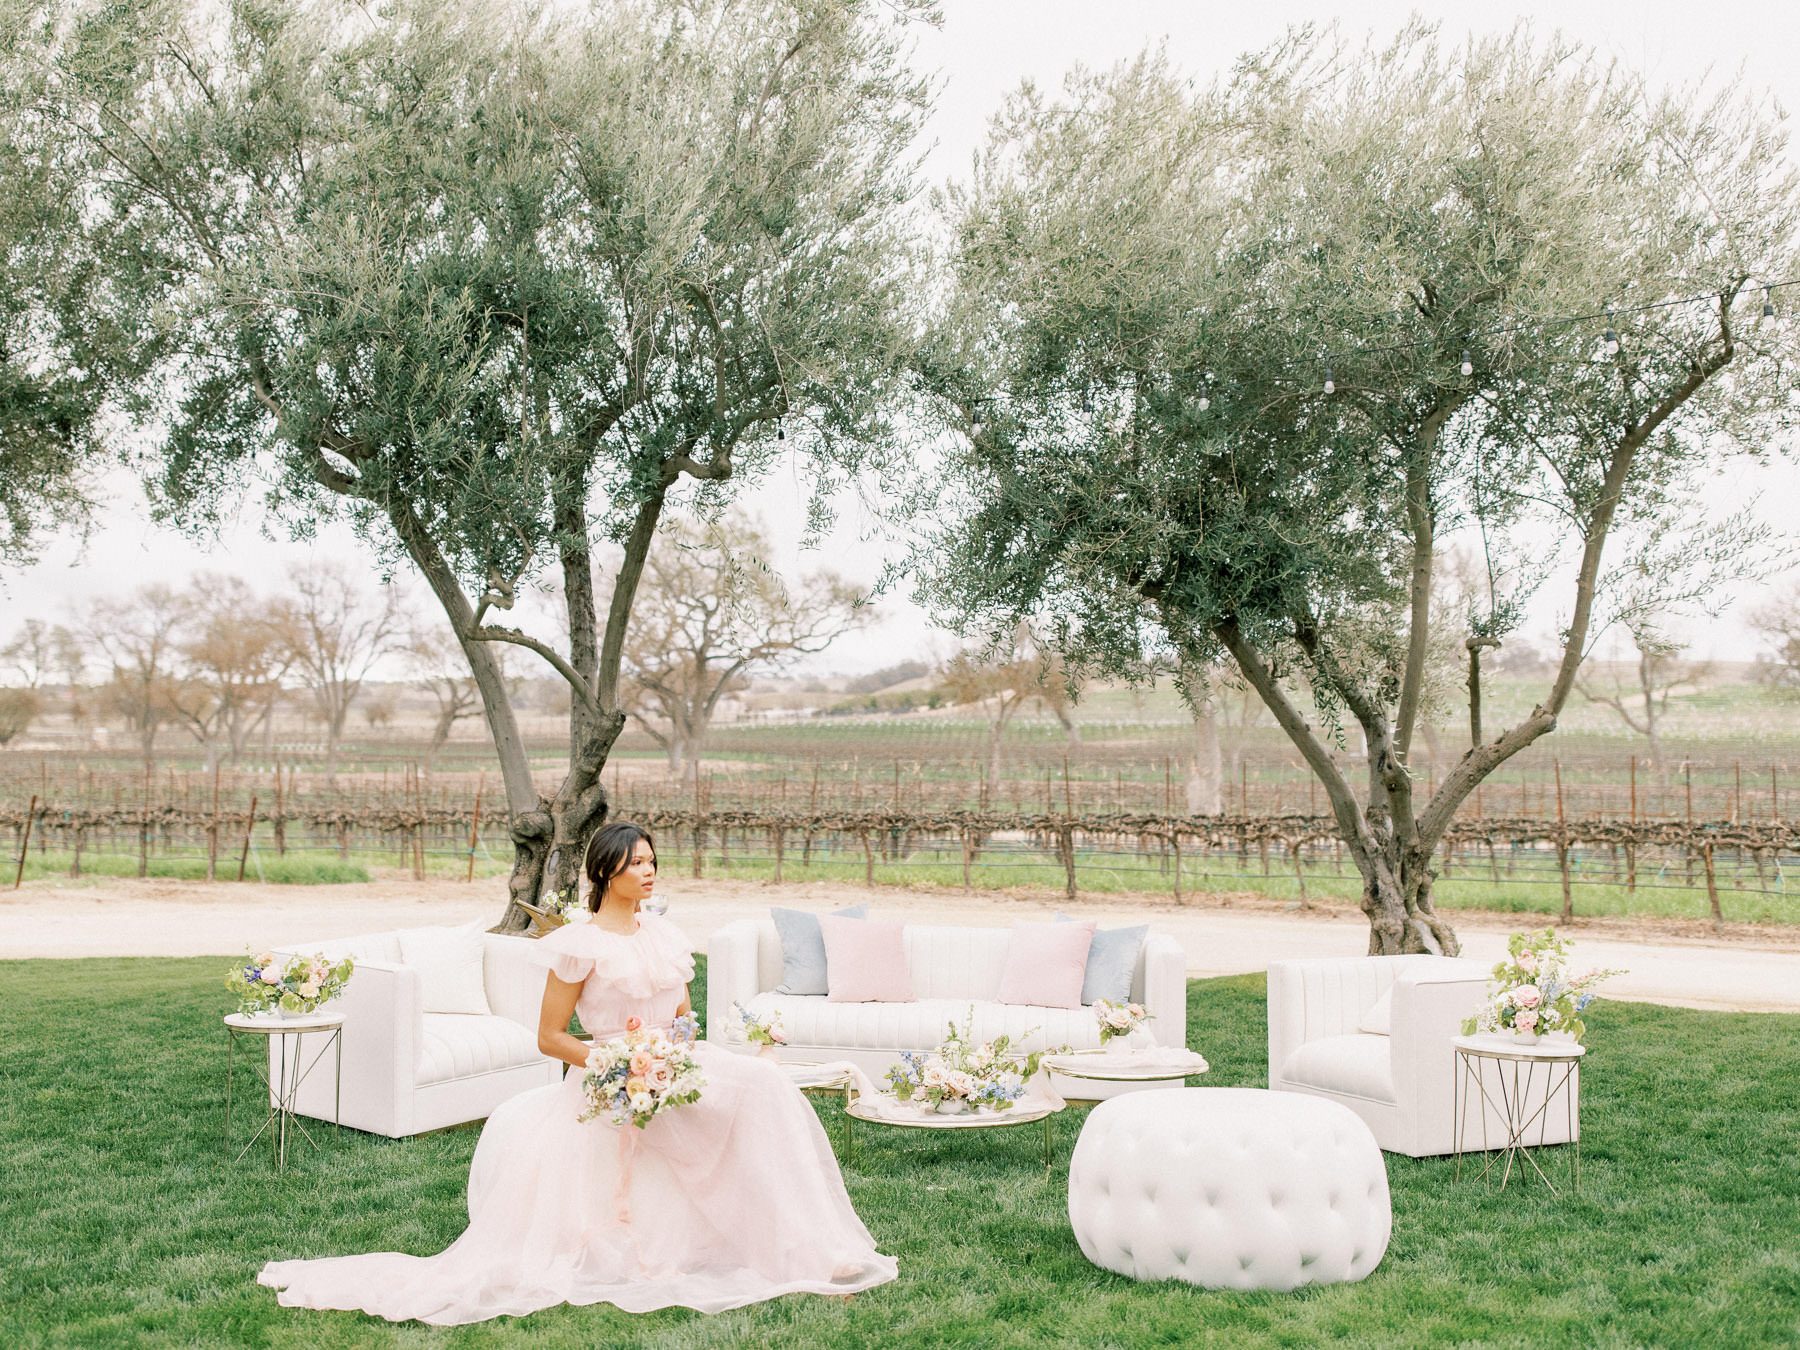 Romantic and whimsical Bridal Editorial Photography at Rava Winery in Paso Robles